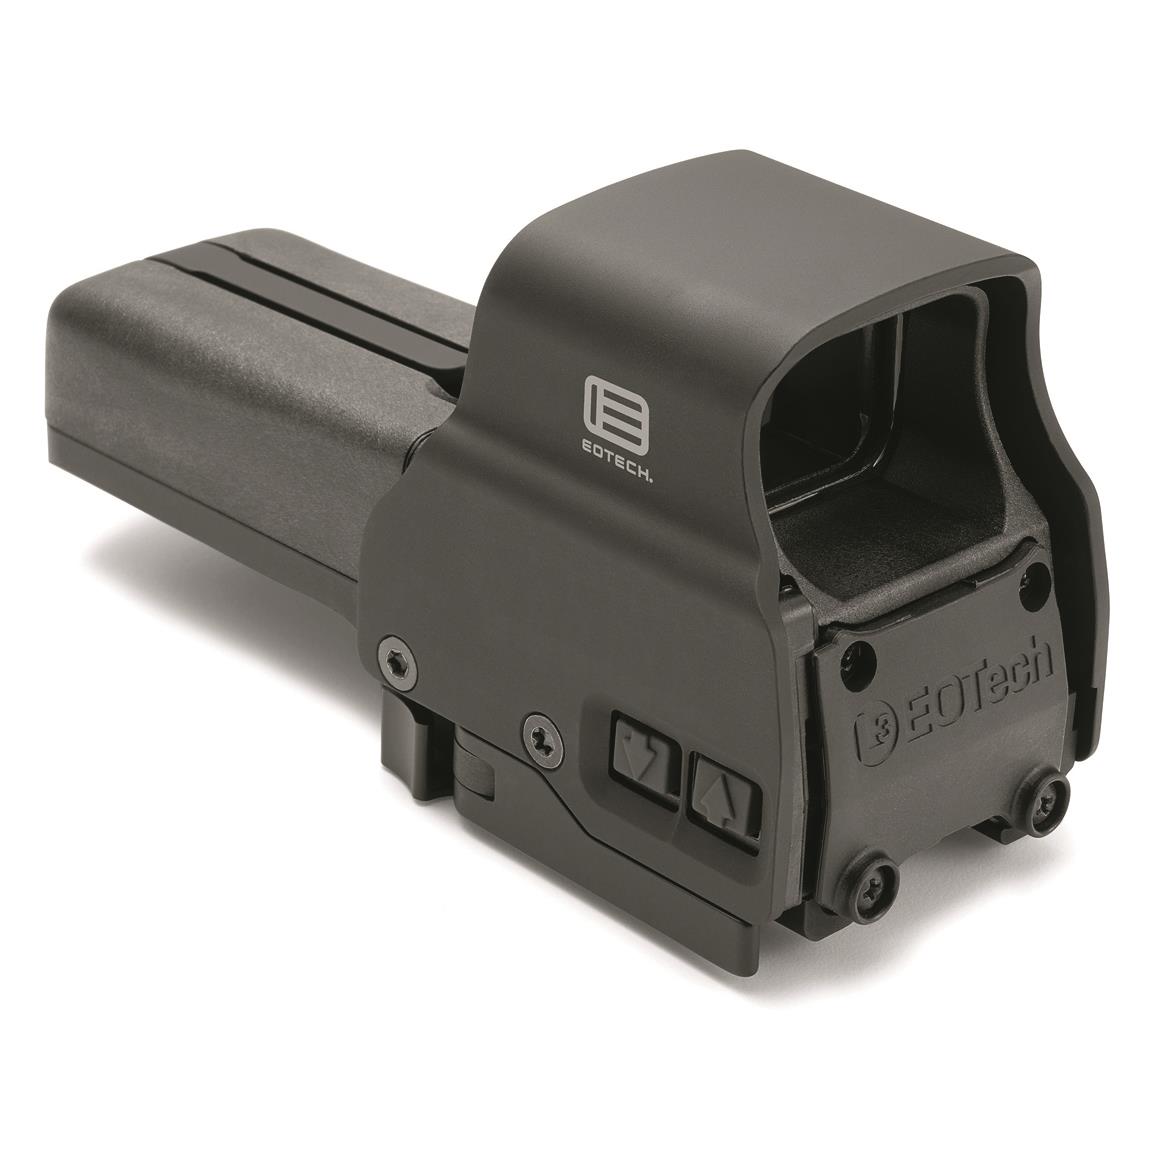 EOTech 518 .A65 Holographic Weapon Sight